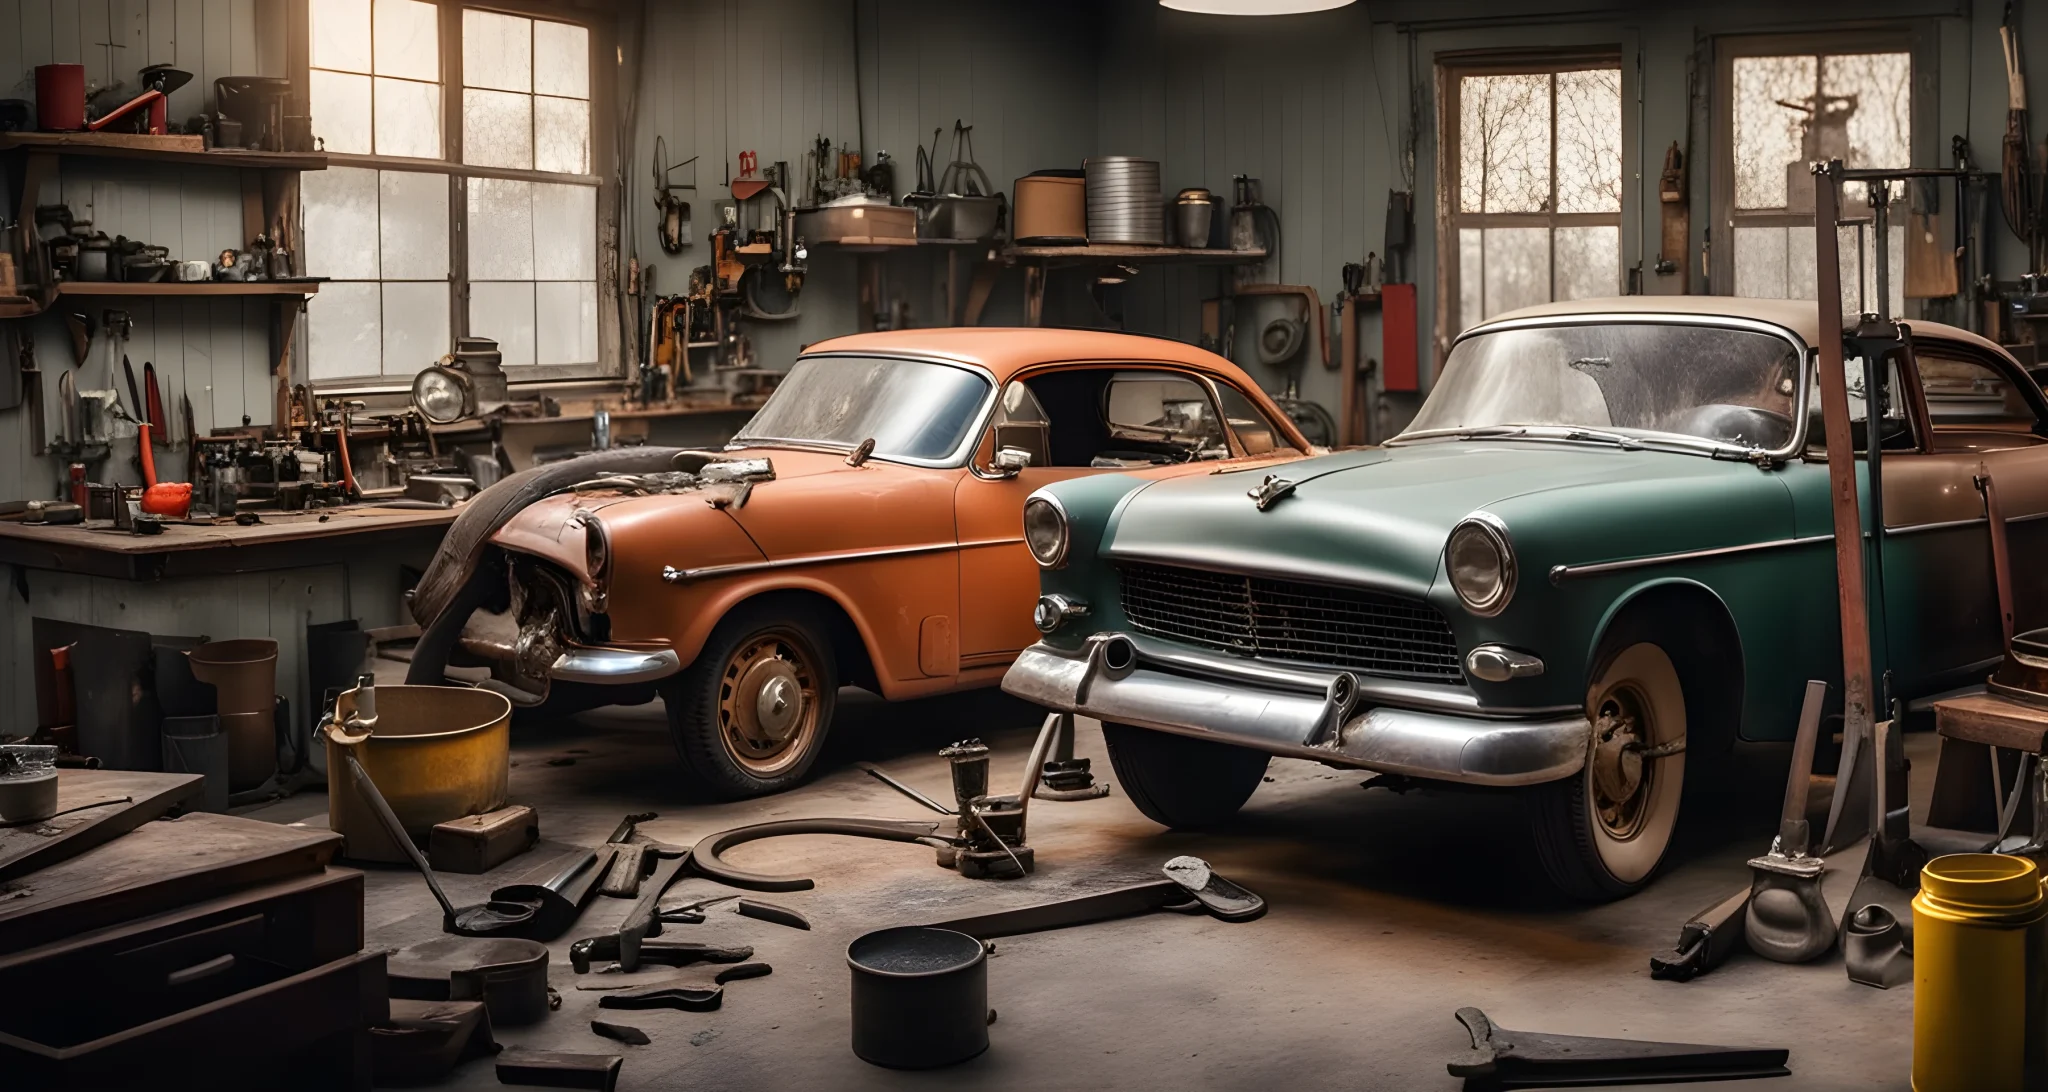 In the image, there are two vintage cars being restored in a workshop. Tools and equipment such as car jacks, wrenches, and paint cans are scattered across the workbenches.